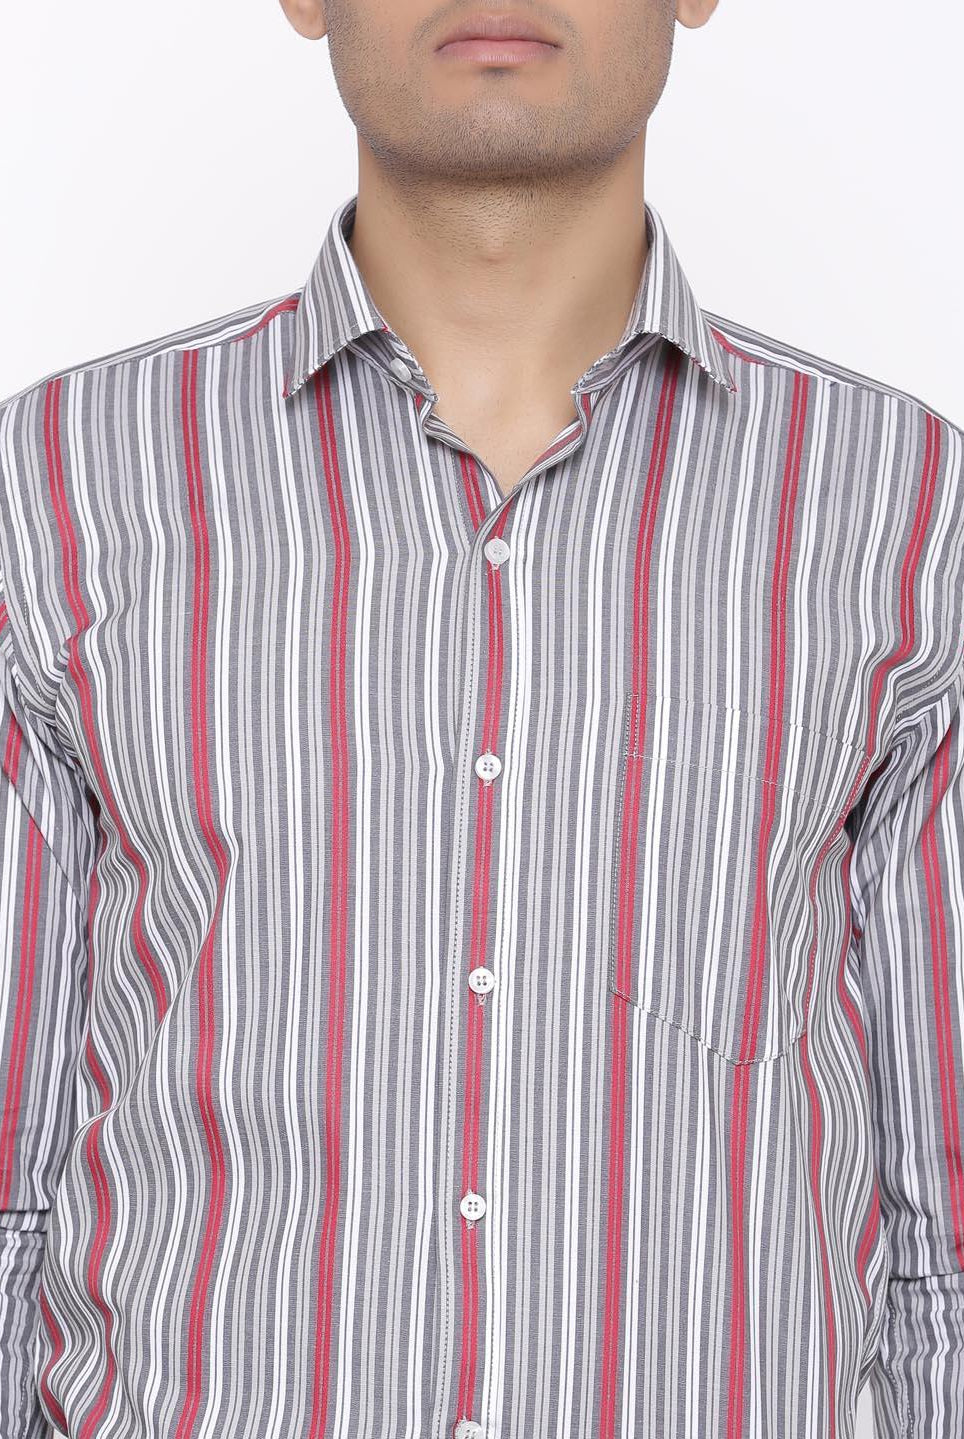 Grey and Pink Stripes Shirt - Tistabene